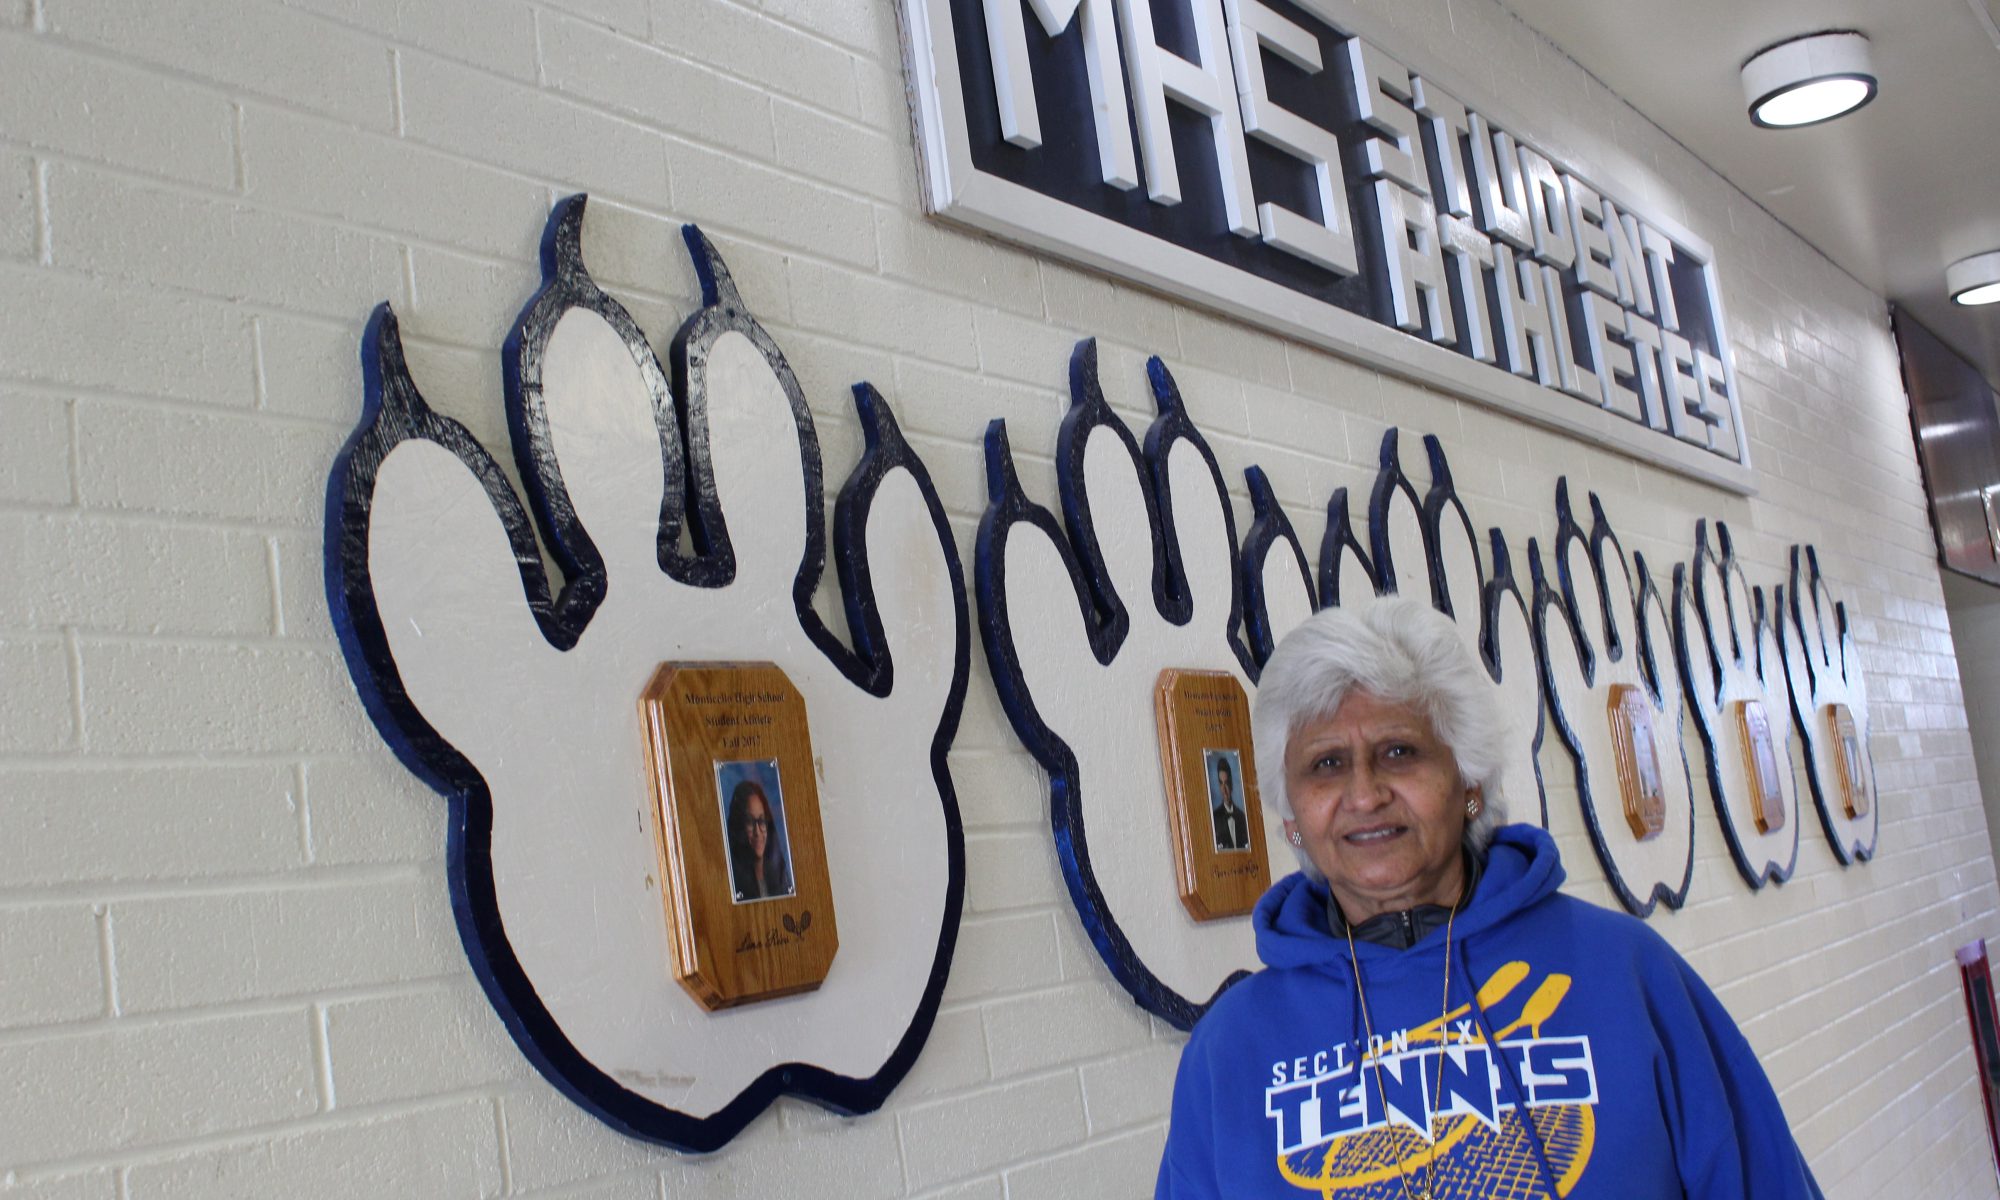 Urvashi Gupta stands in the hallway of Monticello High School with plaques behind her on the wall